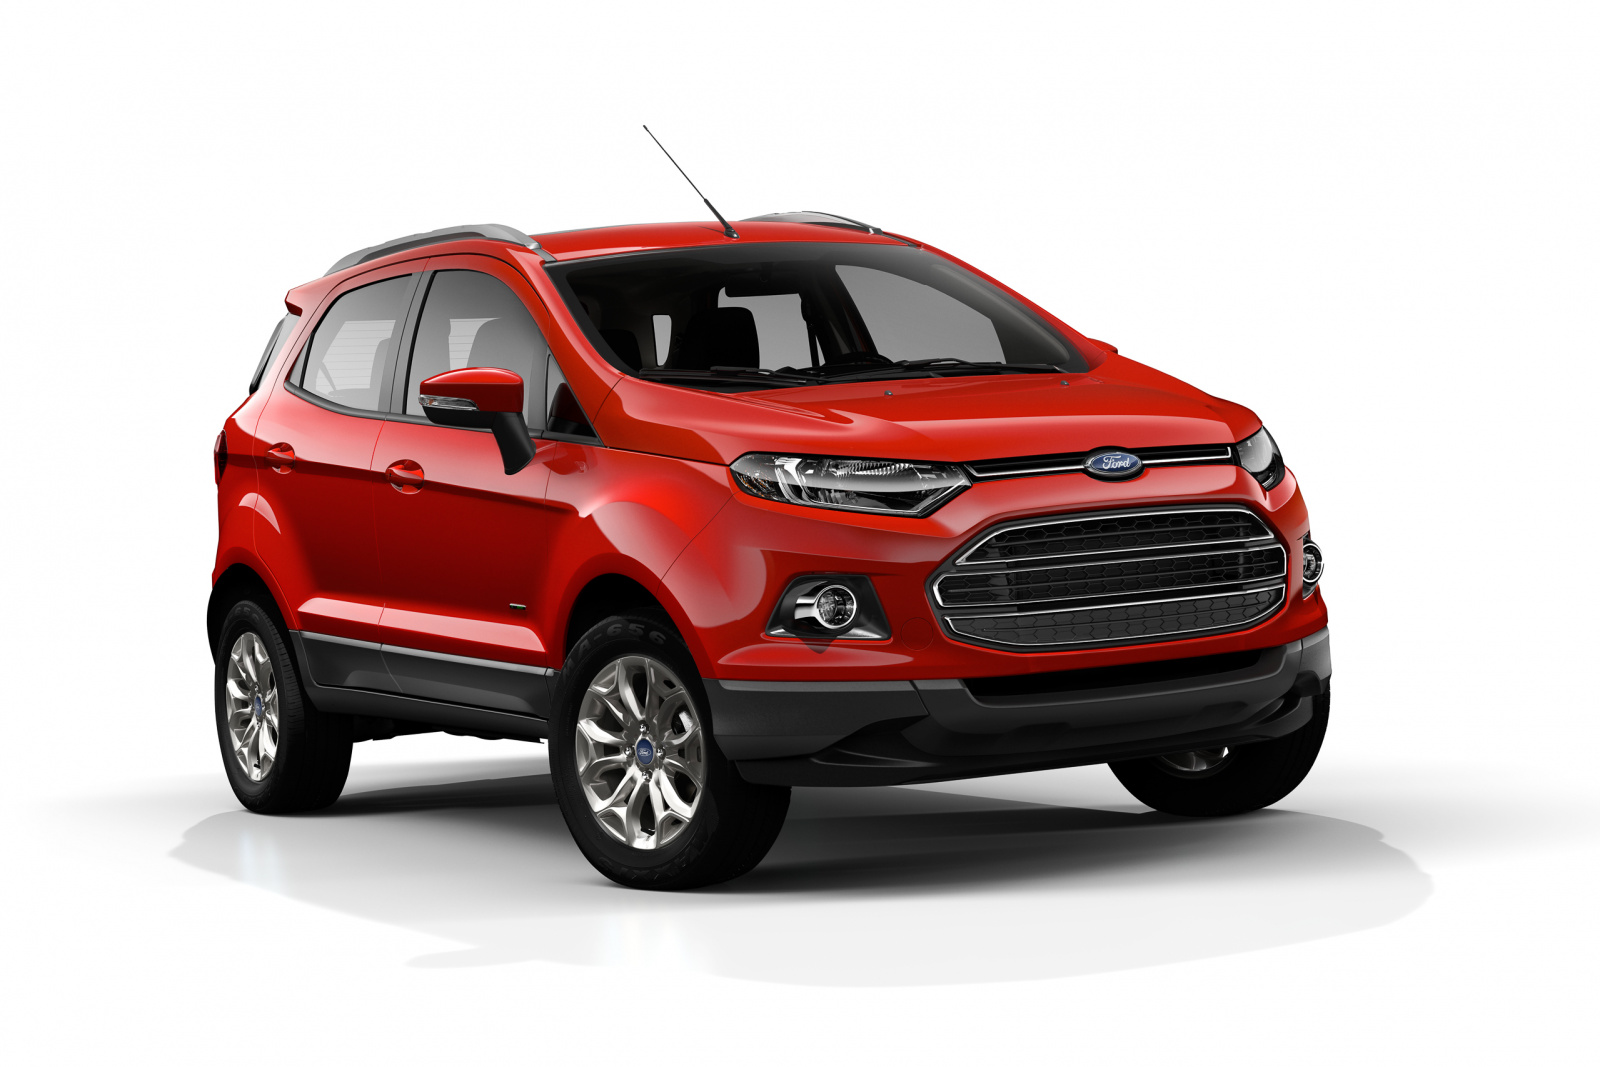 Ford EcoSport - Foto eines Ford Concept-Cars